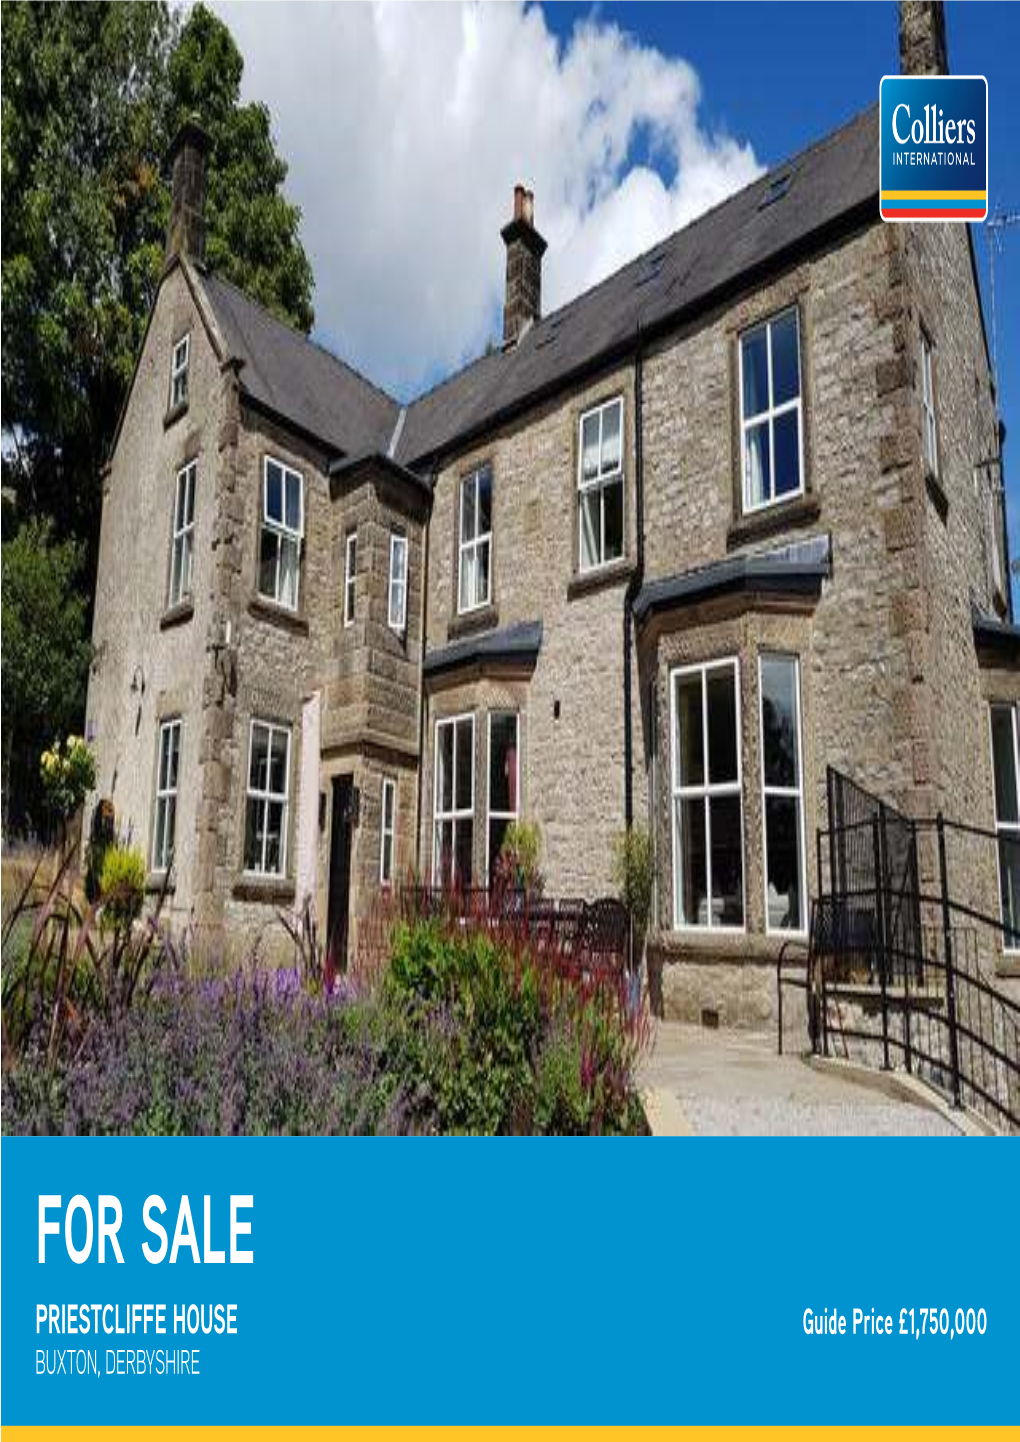 PRIESTCLIFFE HOUSE Guide Price £1,750,000 BUXTON, DERBYSHIRE PRIESTCLIFFE HOUSE, PRIESTCLIFFE, BUXTON, DERBYSHIRE SK17 9TN